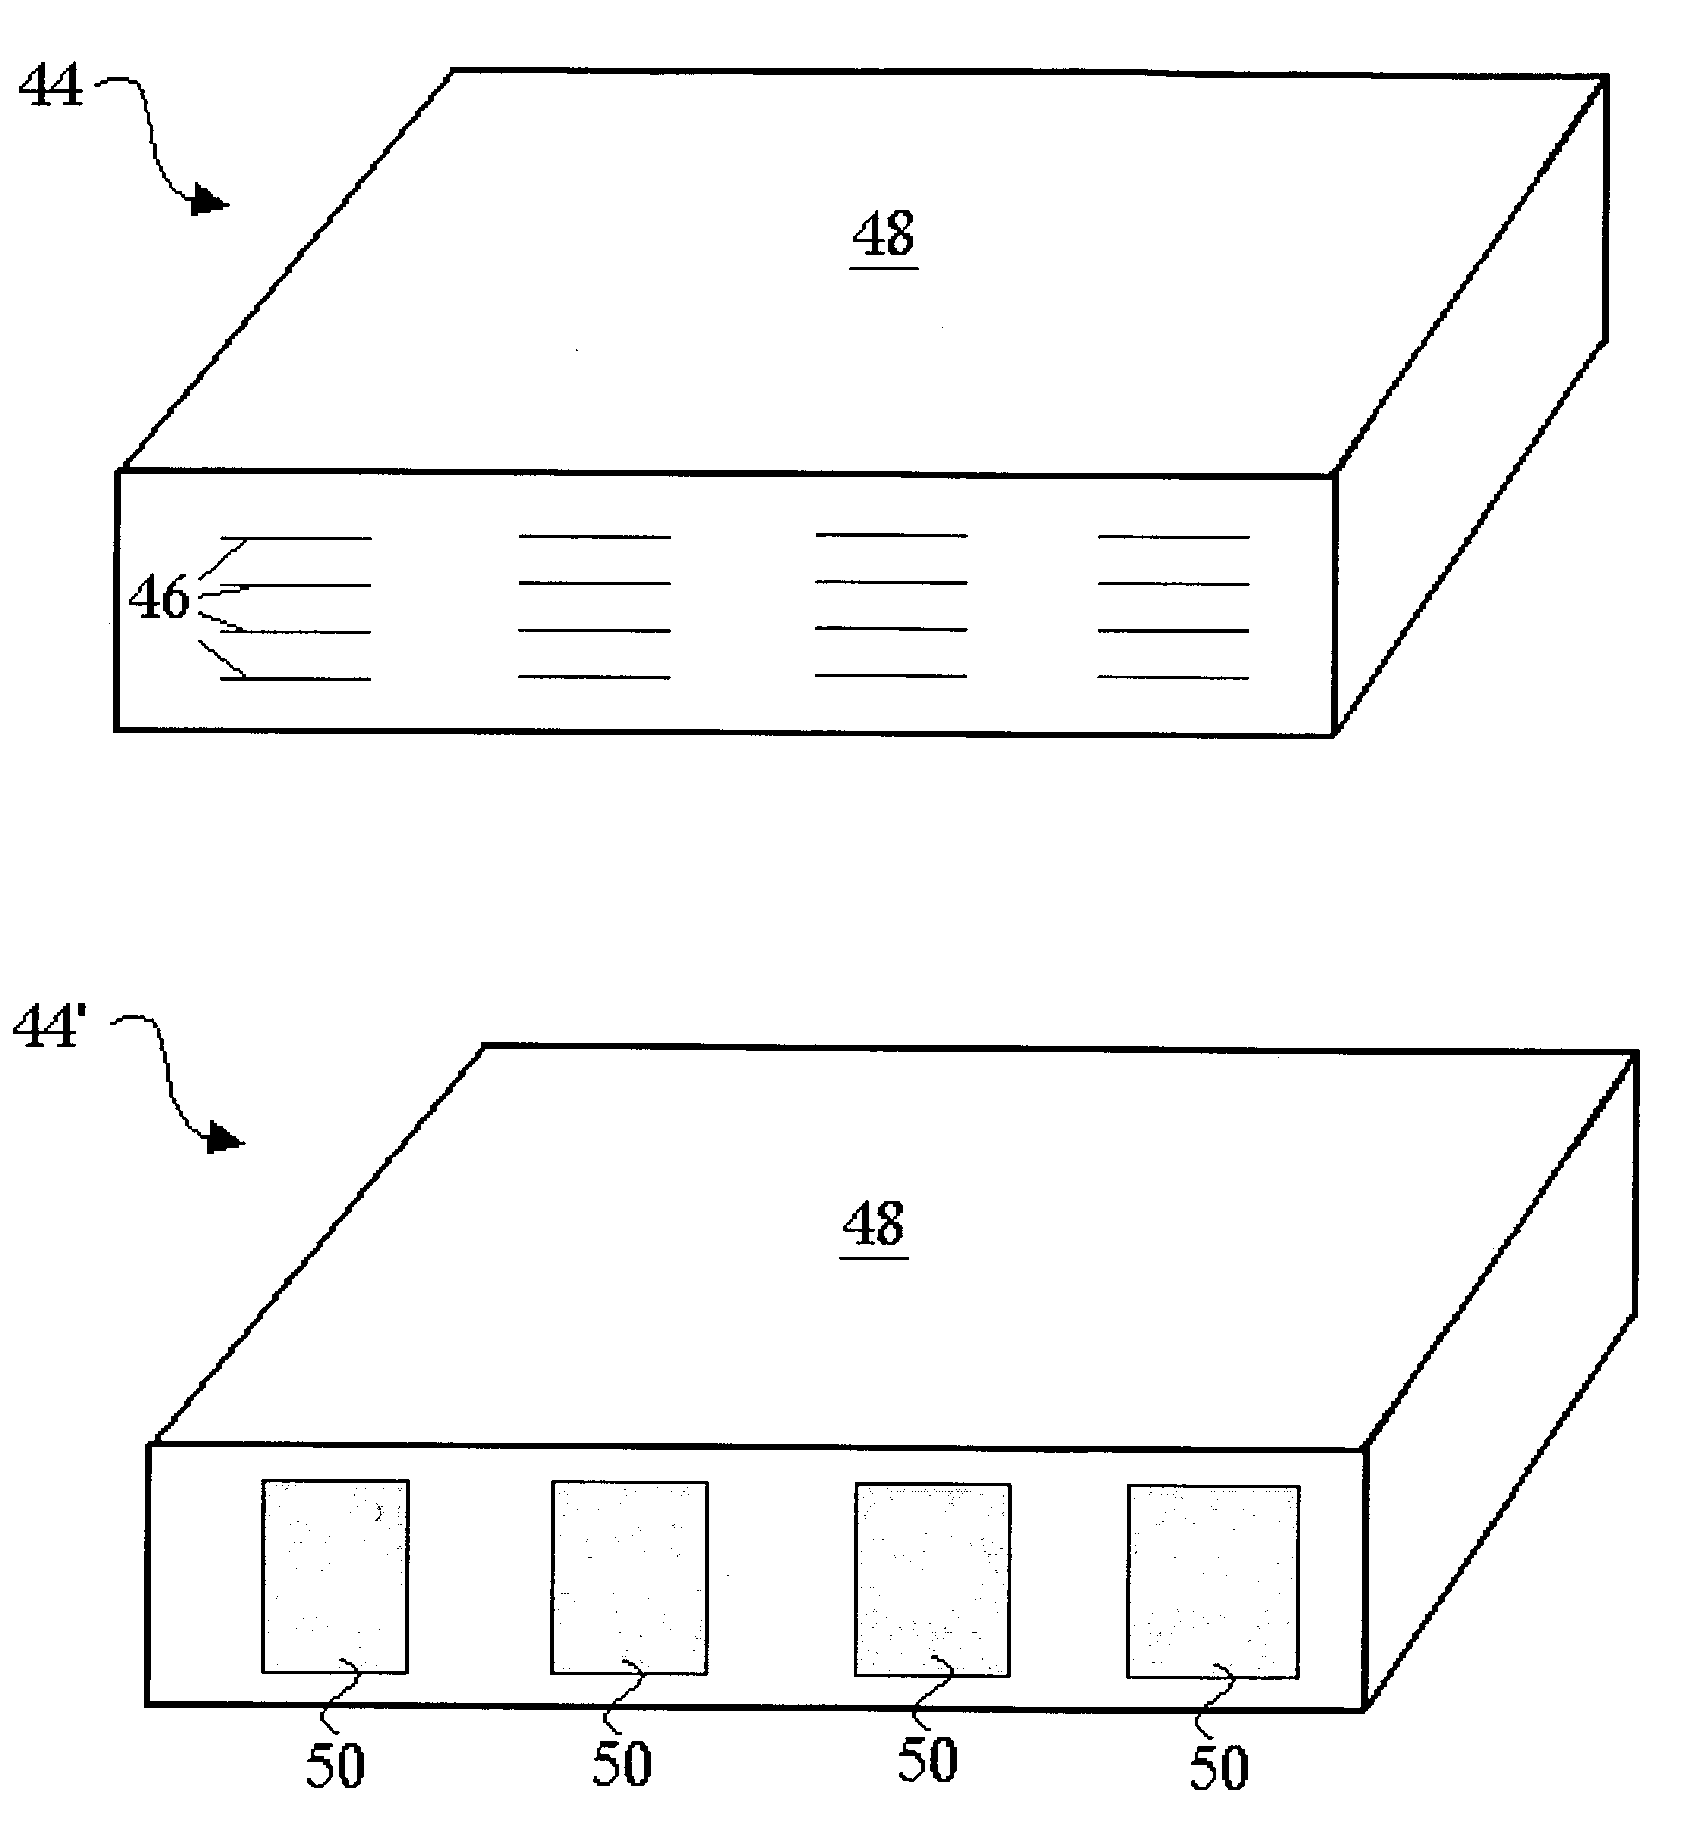 Method for forming plated terminations